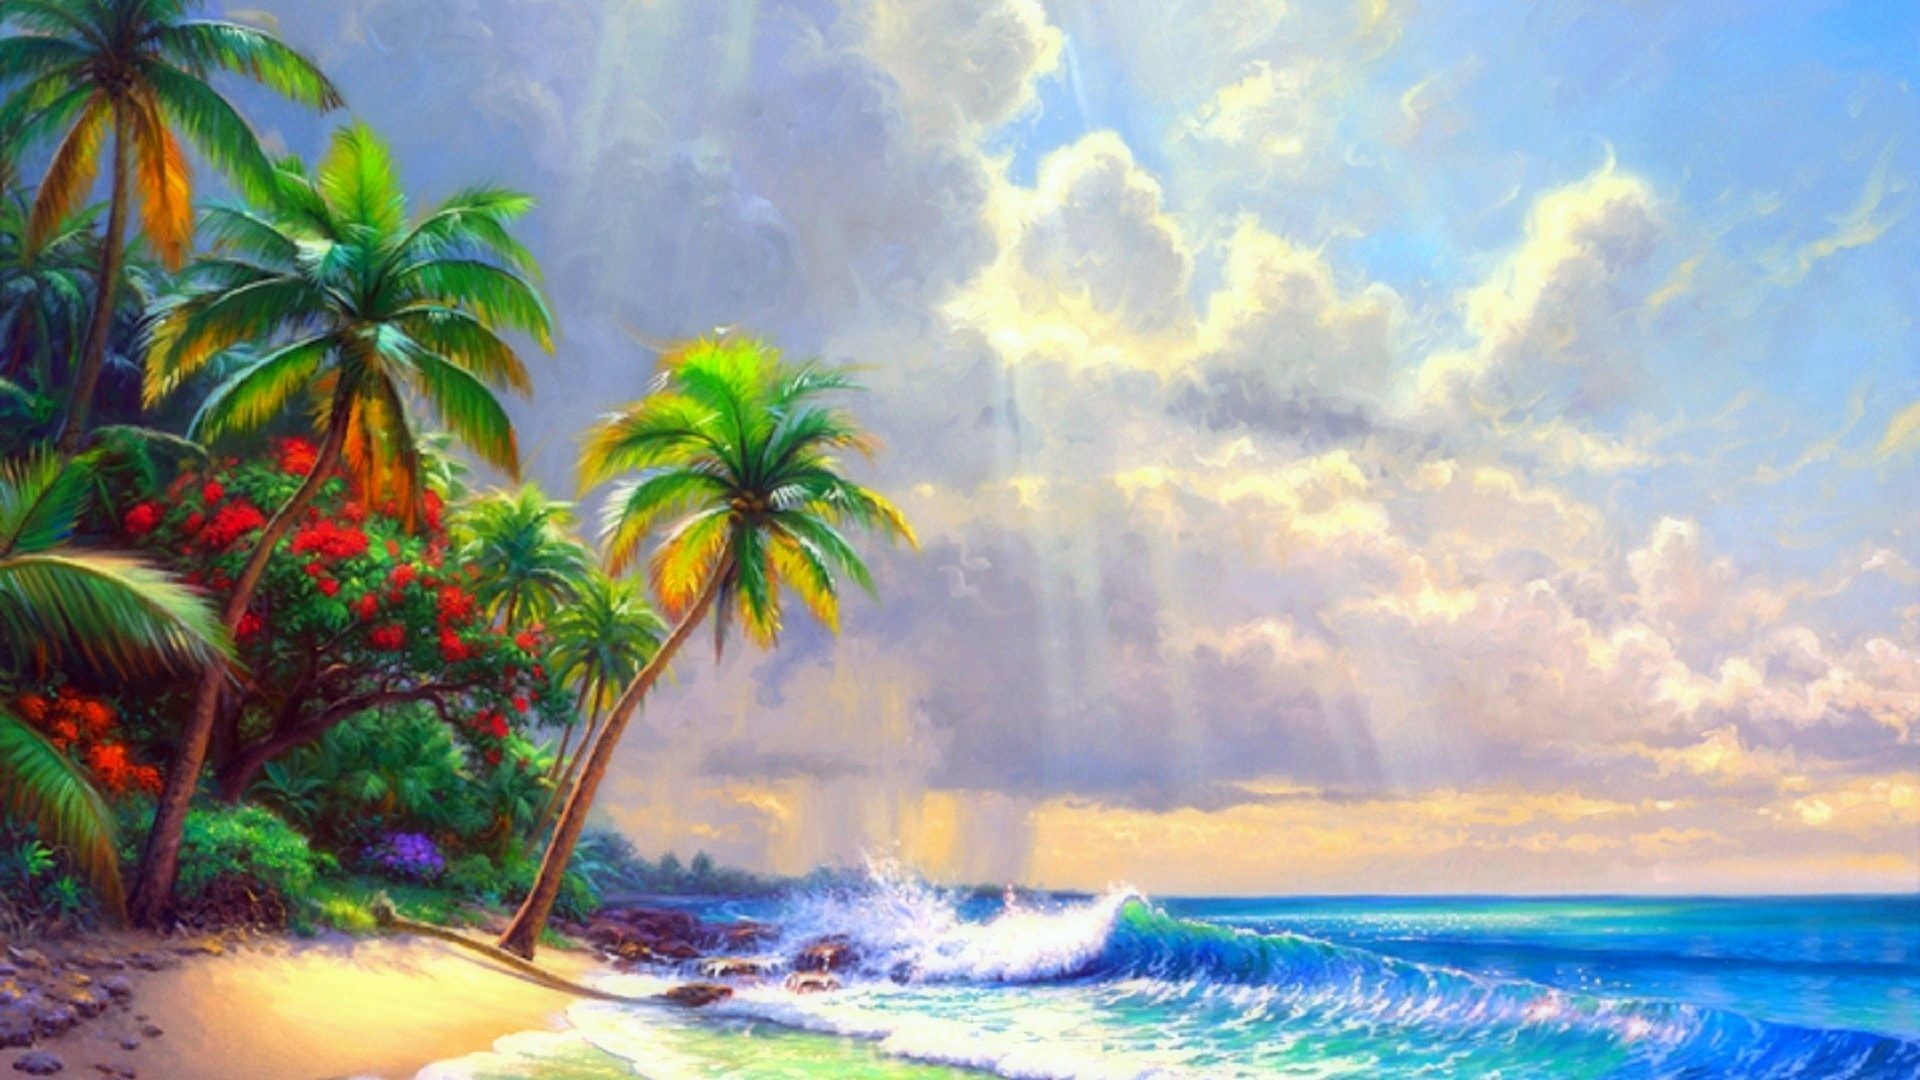 1920x1080 Pre Tag - Sea Paintings Getaways Sky Nature Clearing Bright Beaches  Relaxing Creative Tropical Scenery Clouds